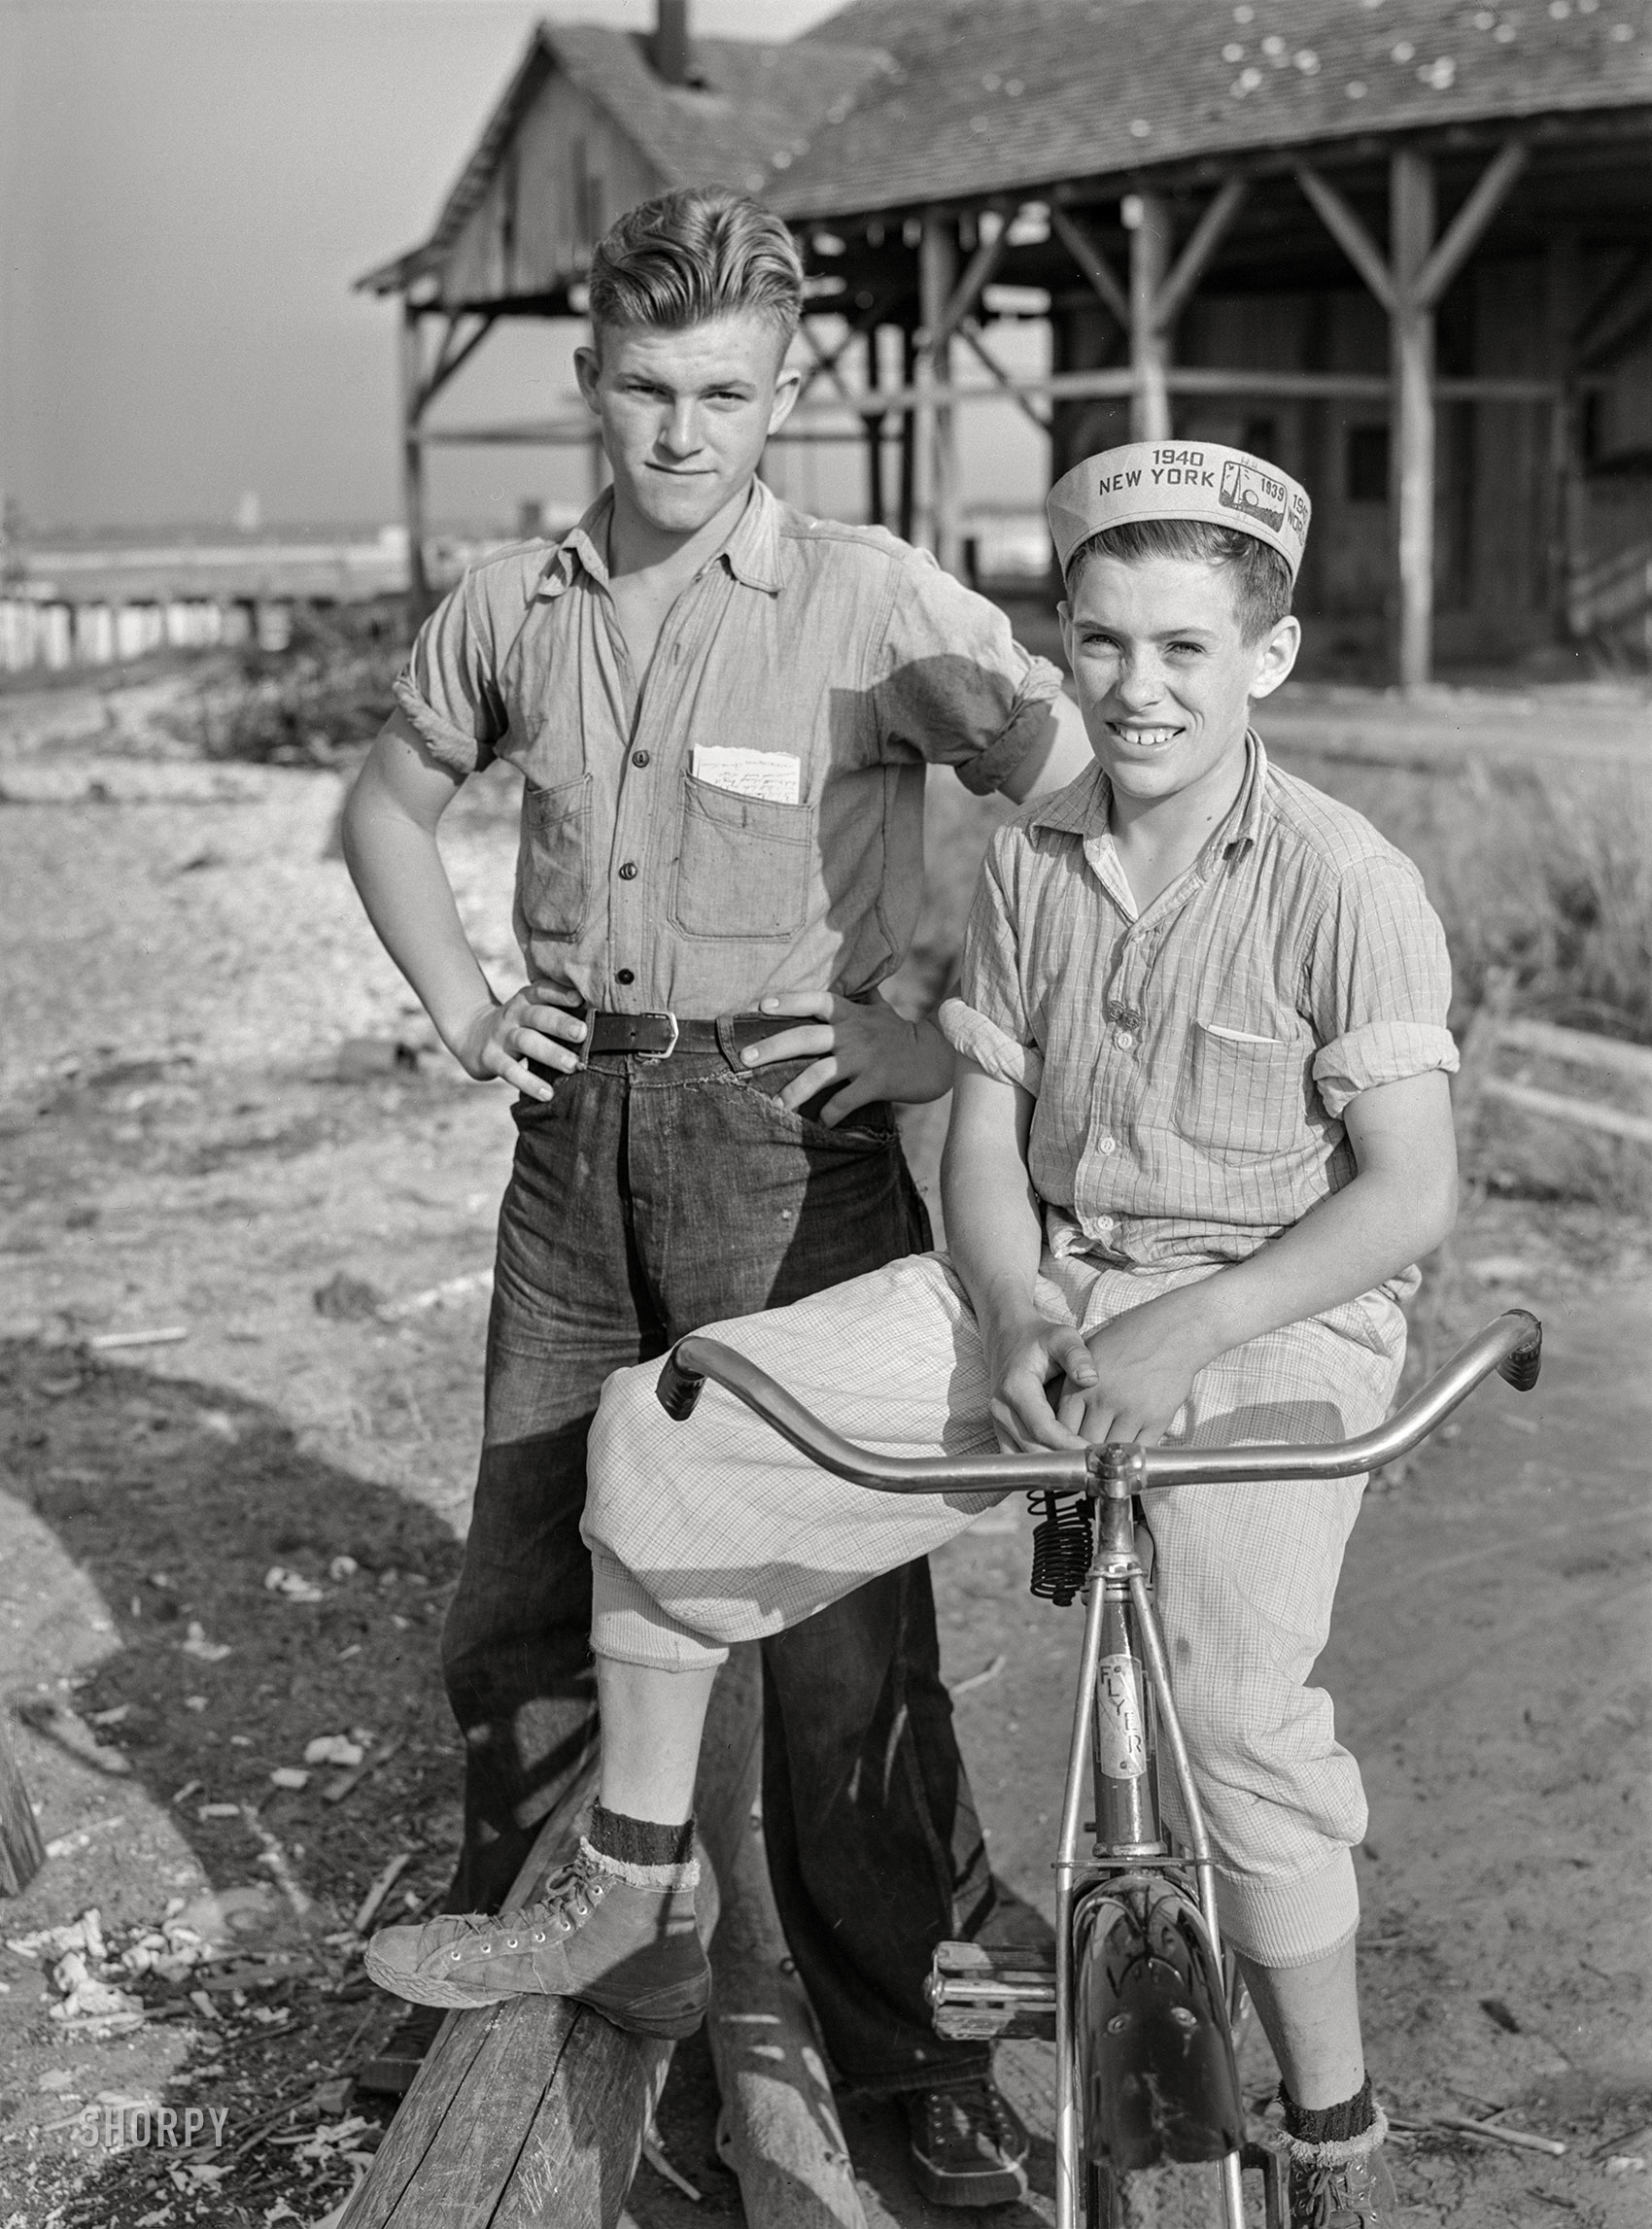 May 1940. "Two boys, sons of fishermen. Deal Island, Maryland." Medium format negative by Jack Delano for the Farm Security Administration. View full size.